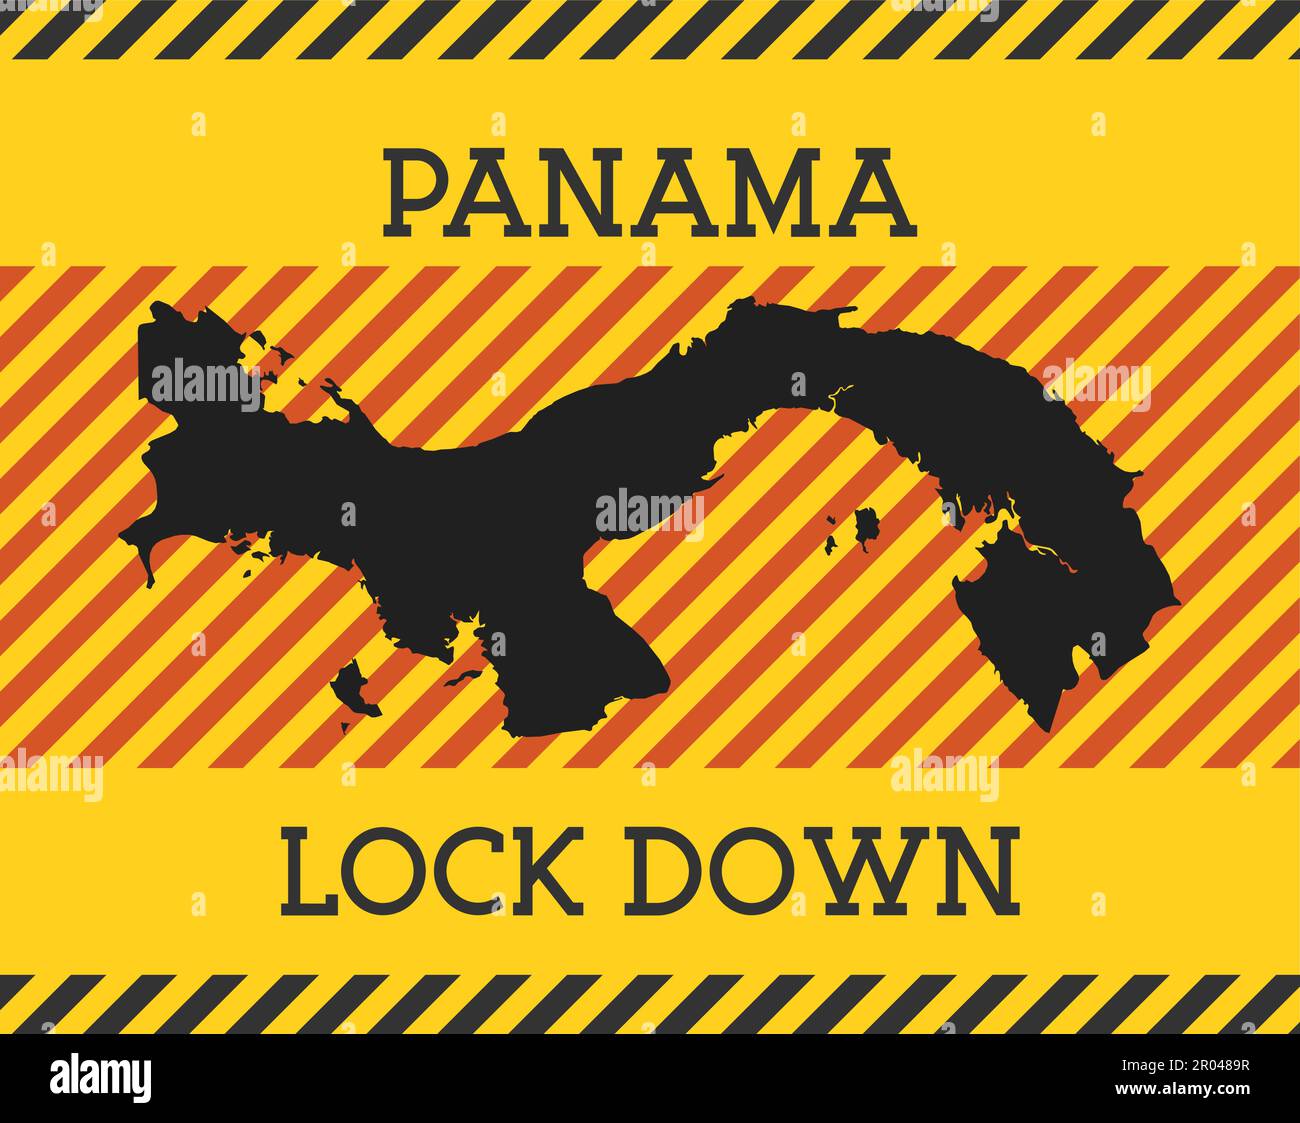 Panama Lock Down Sign. Yellow country pandemic danger icon. Vector illustration. Stock Vector